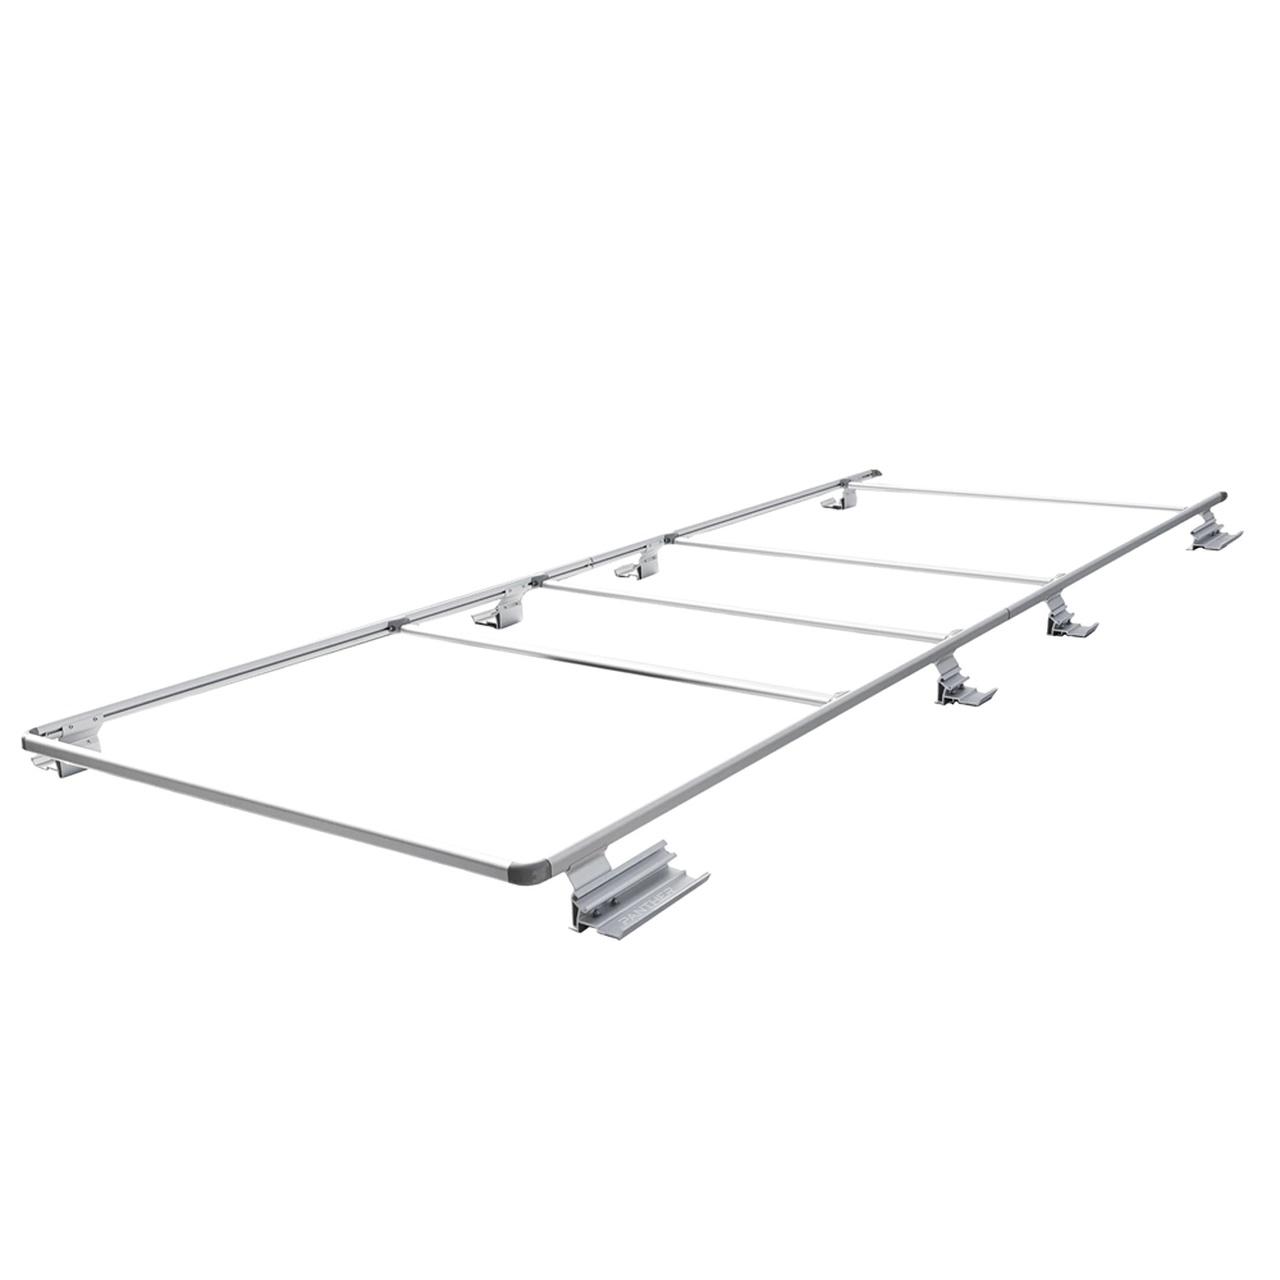 Fiamma Ram Promaster 159″ Extended Roof Rack (Silver) | 05808-02